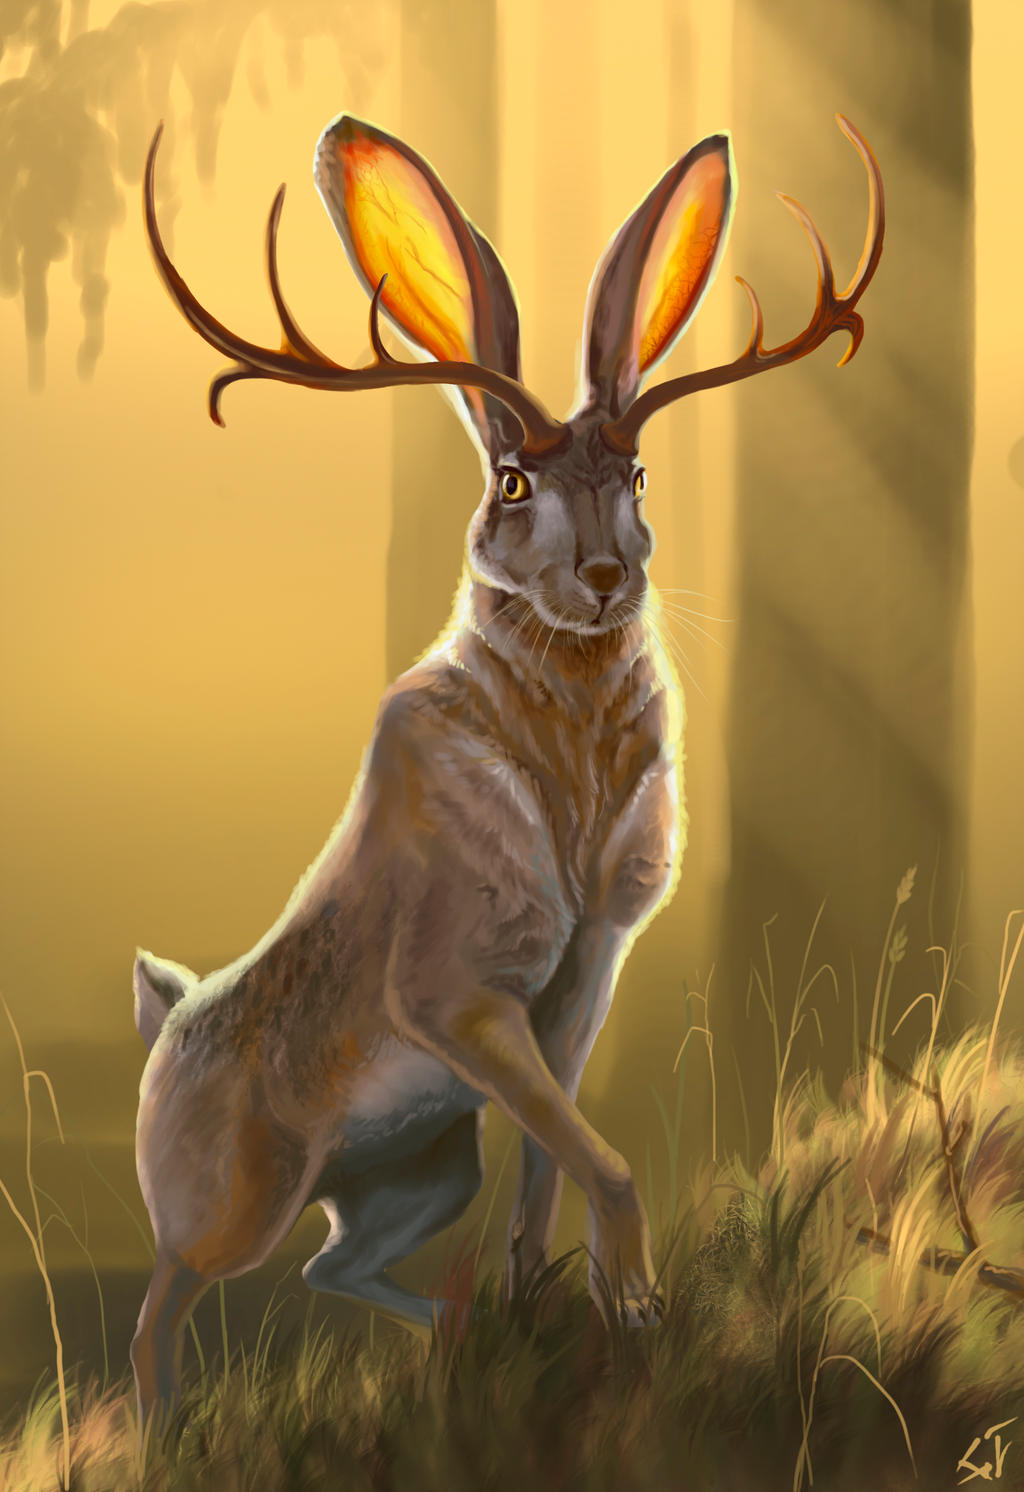 Jackalope, The Rabbit With Horns/Antlers - Are Jackalopes Real?